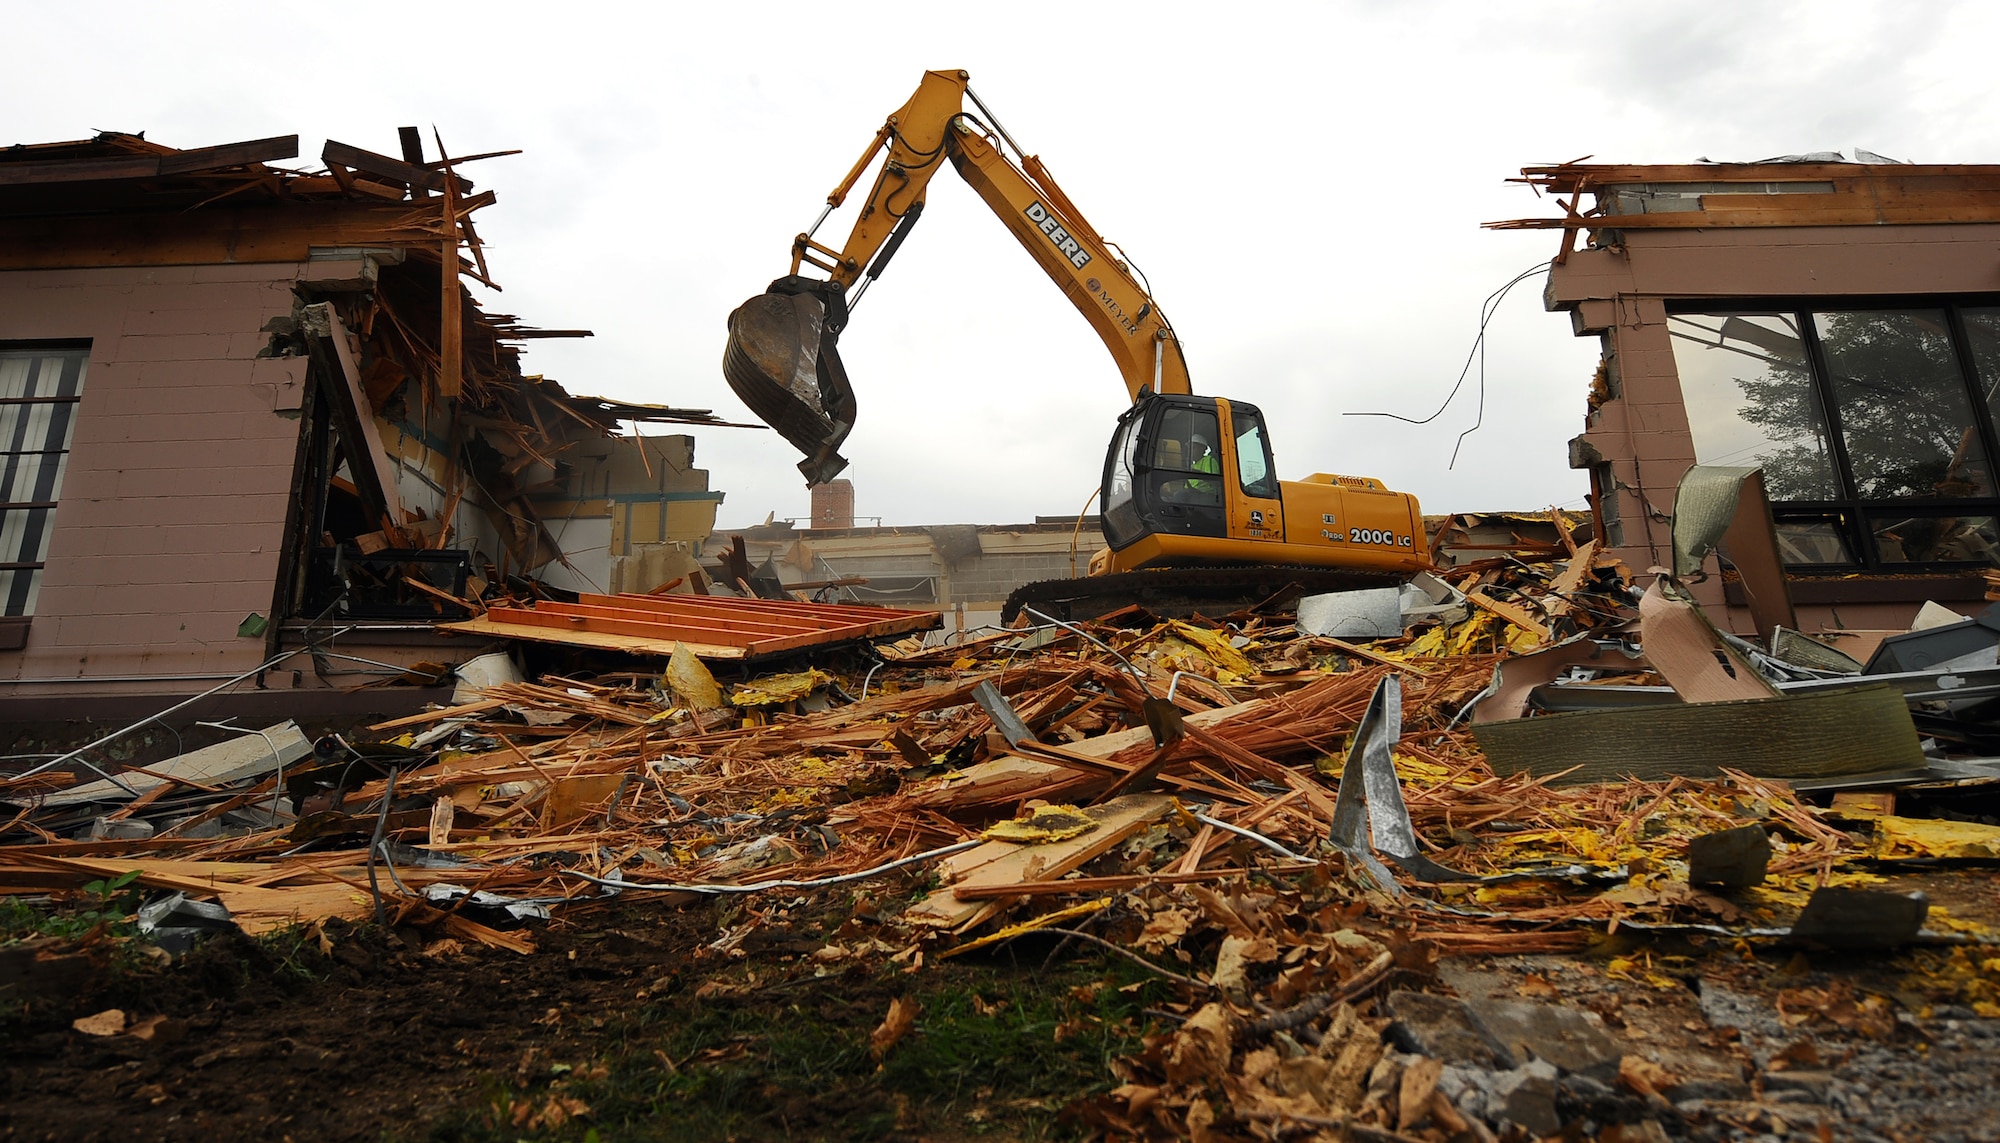 OFFUTT AIR FORCE BASE, Neb. -- Building 418 is demolished here July 27. The facility served numerous purposes including as an Airman's club, community center and military clothing sales store. U.S. Air Force Photo by Josh Plueger